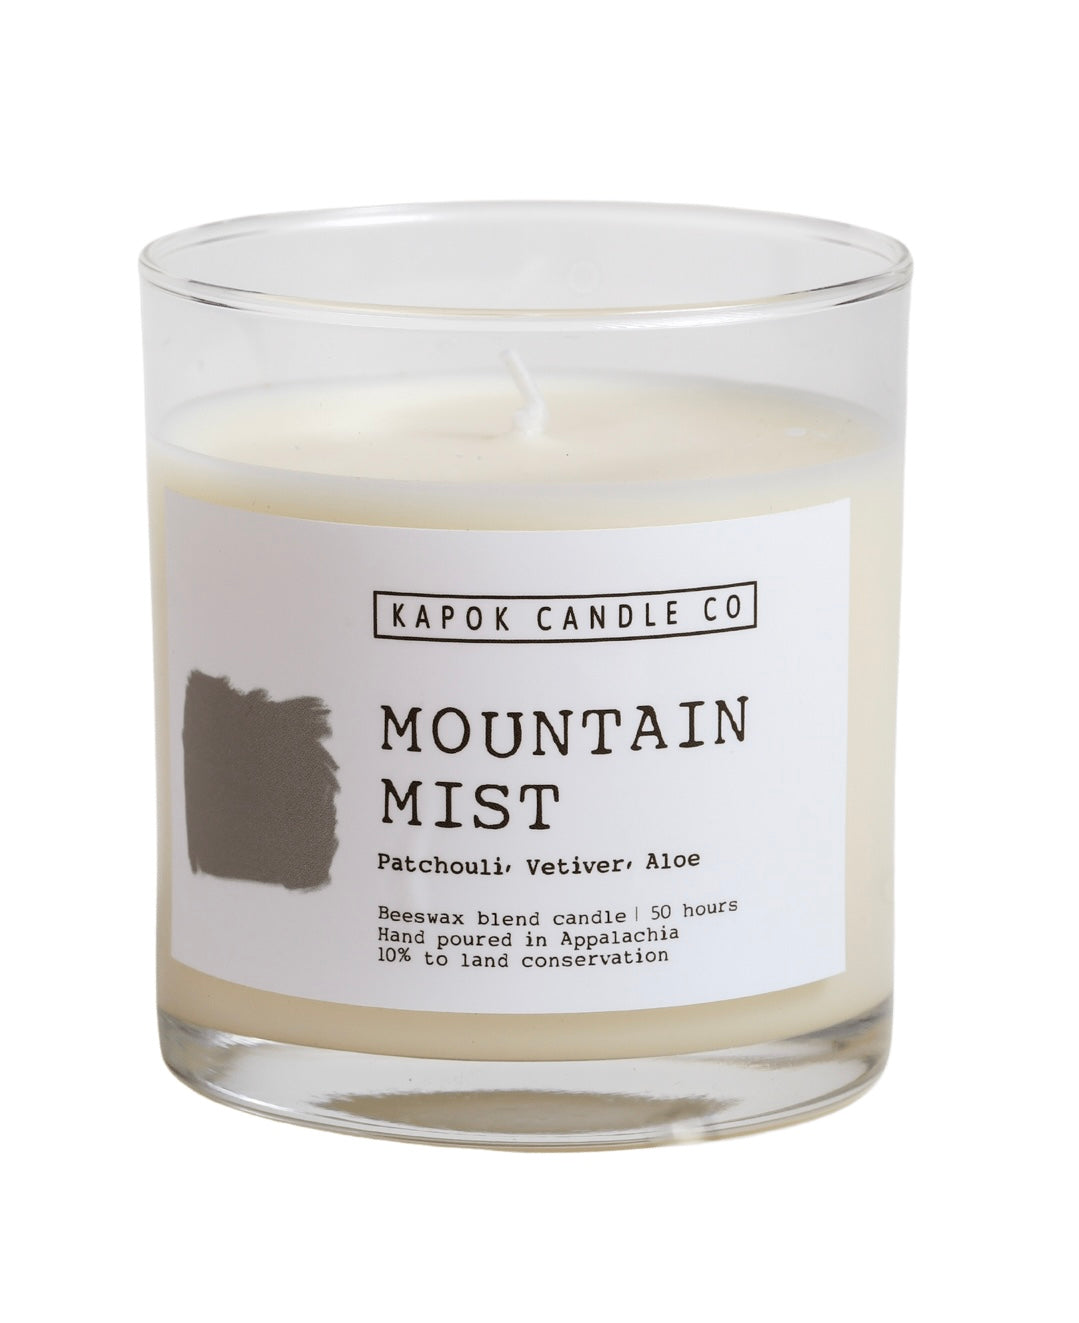 Mountain Mist Beeswax Blend Candle, 100% Cotton Wicks, Wooden Lid